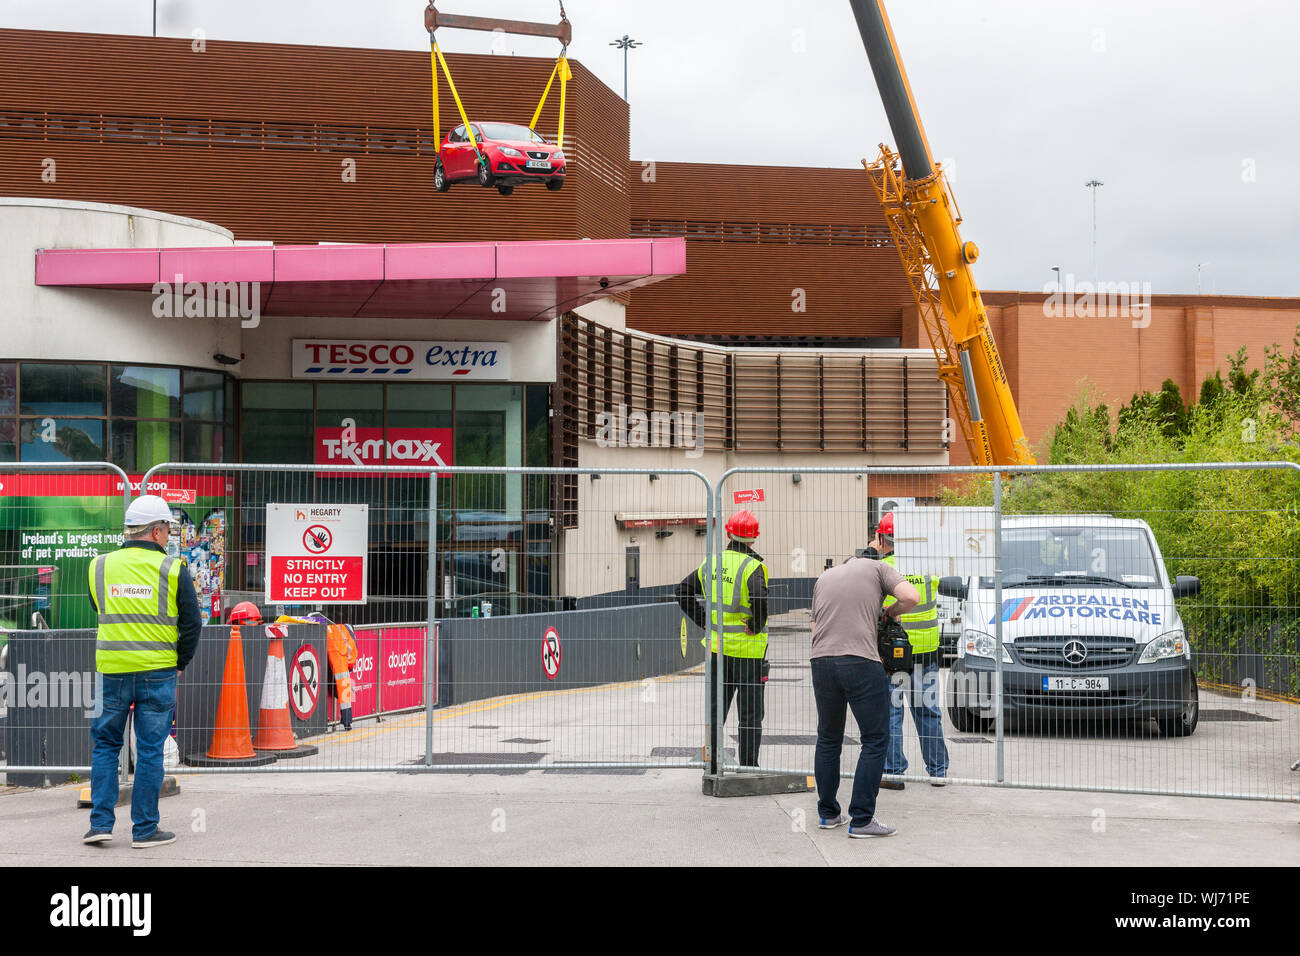 Douglas, Cork, Ireland. 03rd Sep, 2019. The second car to be recovered from the Douglas Shopping Centre Car Park been lifted on off the roof where over 100 cars have been trapped after a major fire in the multi-storey car park over the weekend. Recovery of the vehicles will take over a week and the building will then be demolished. - Picture; Credit: David Creedon/Alamy Live News Stock Photo